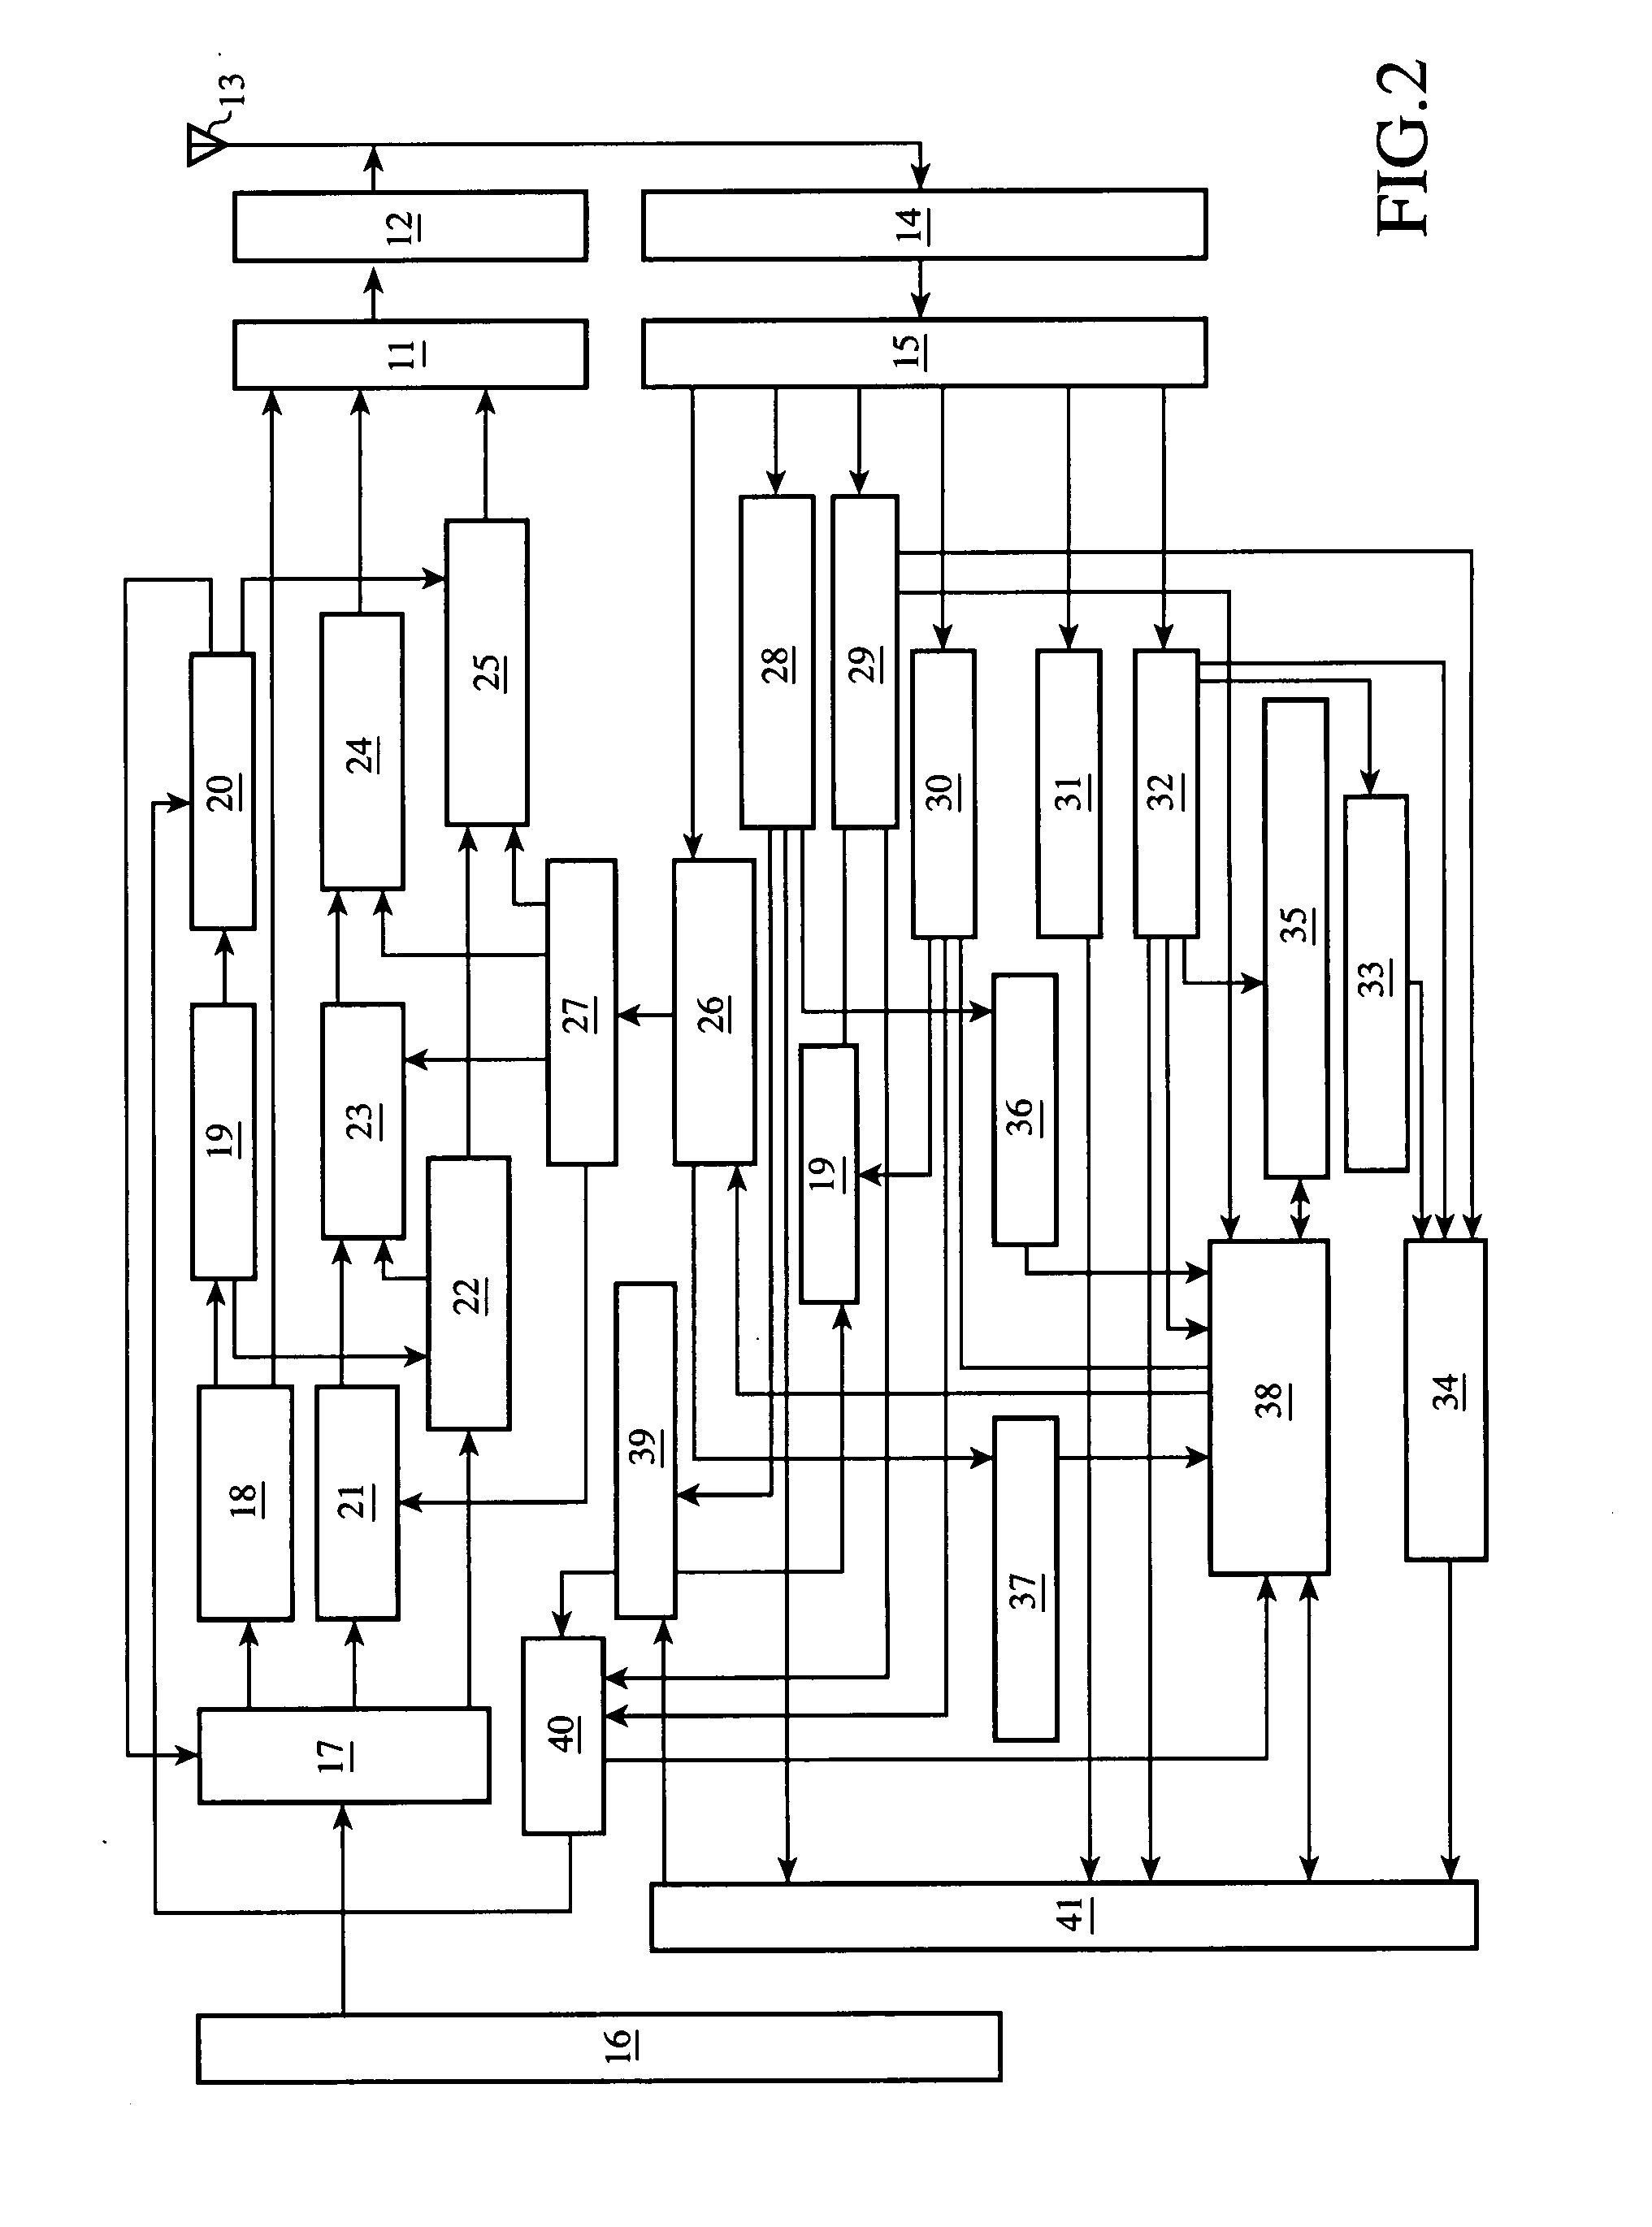 Mobile communications system, handover controlling method, radio network controller, and mobile terminal